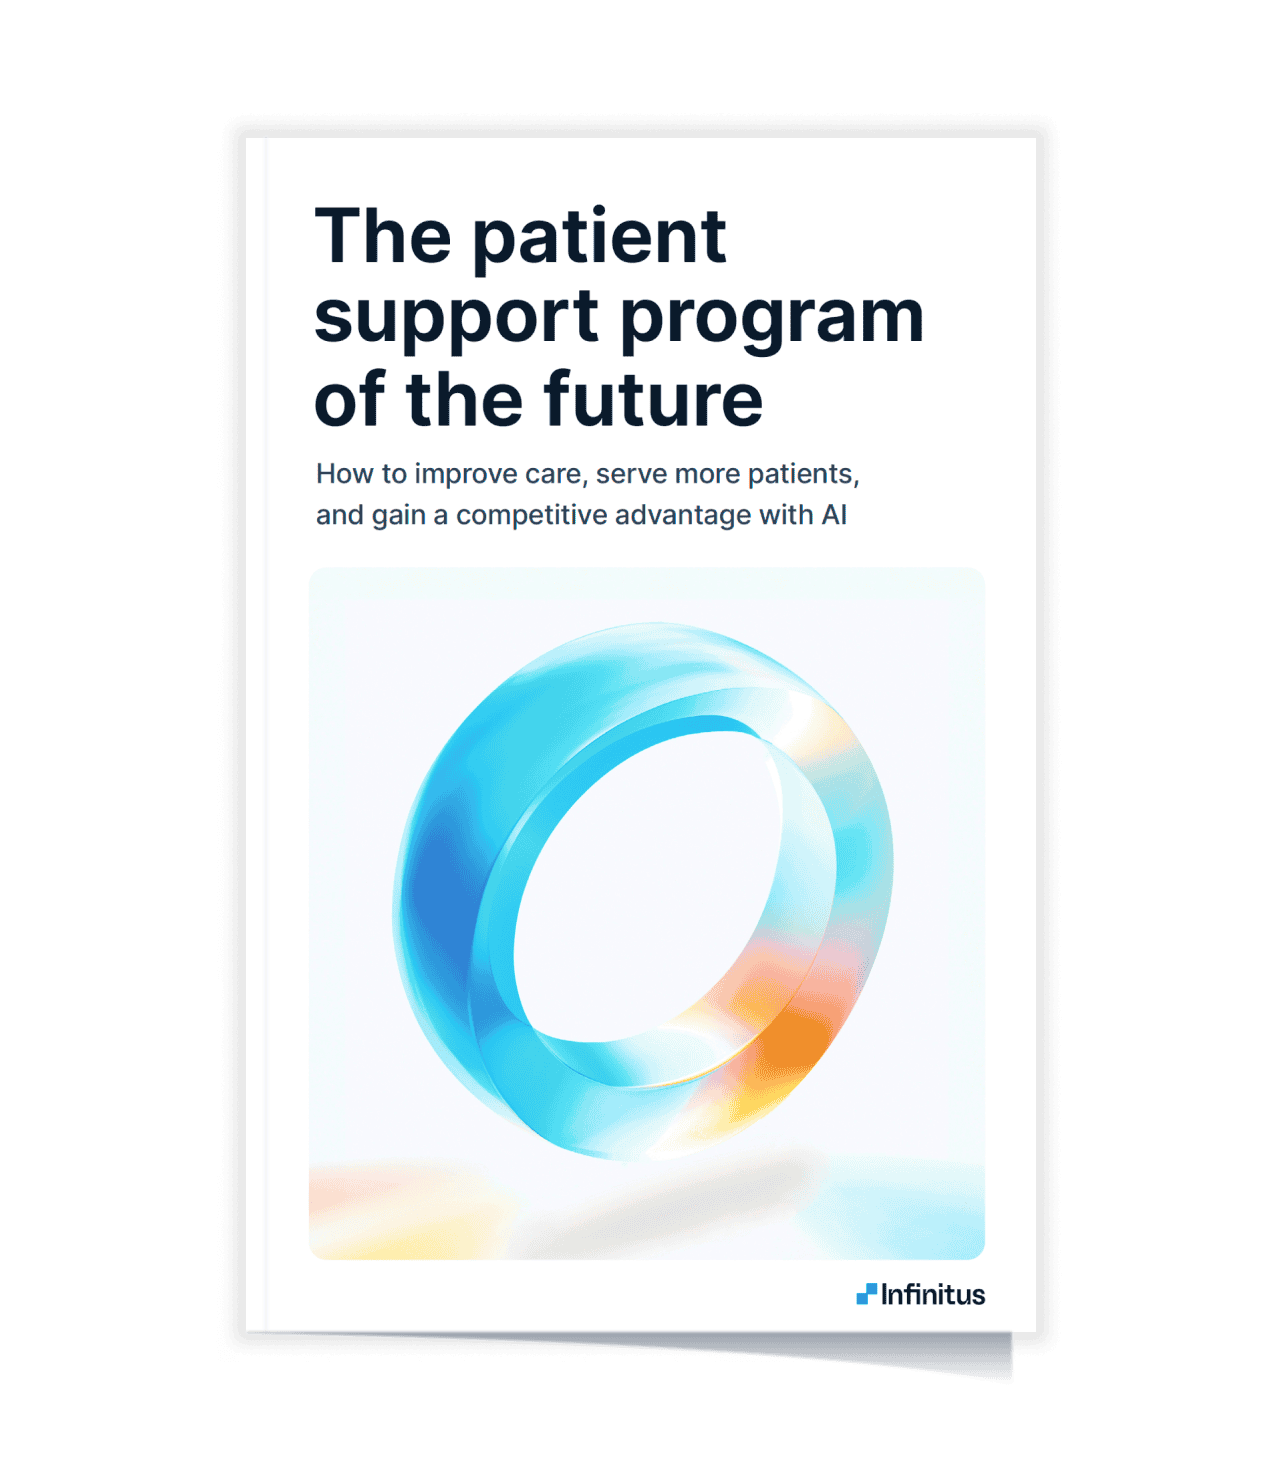 The patient support program of the future ebook cover